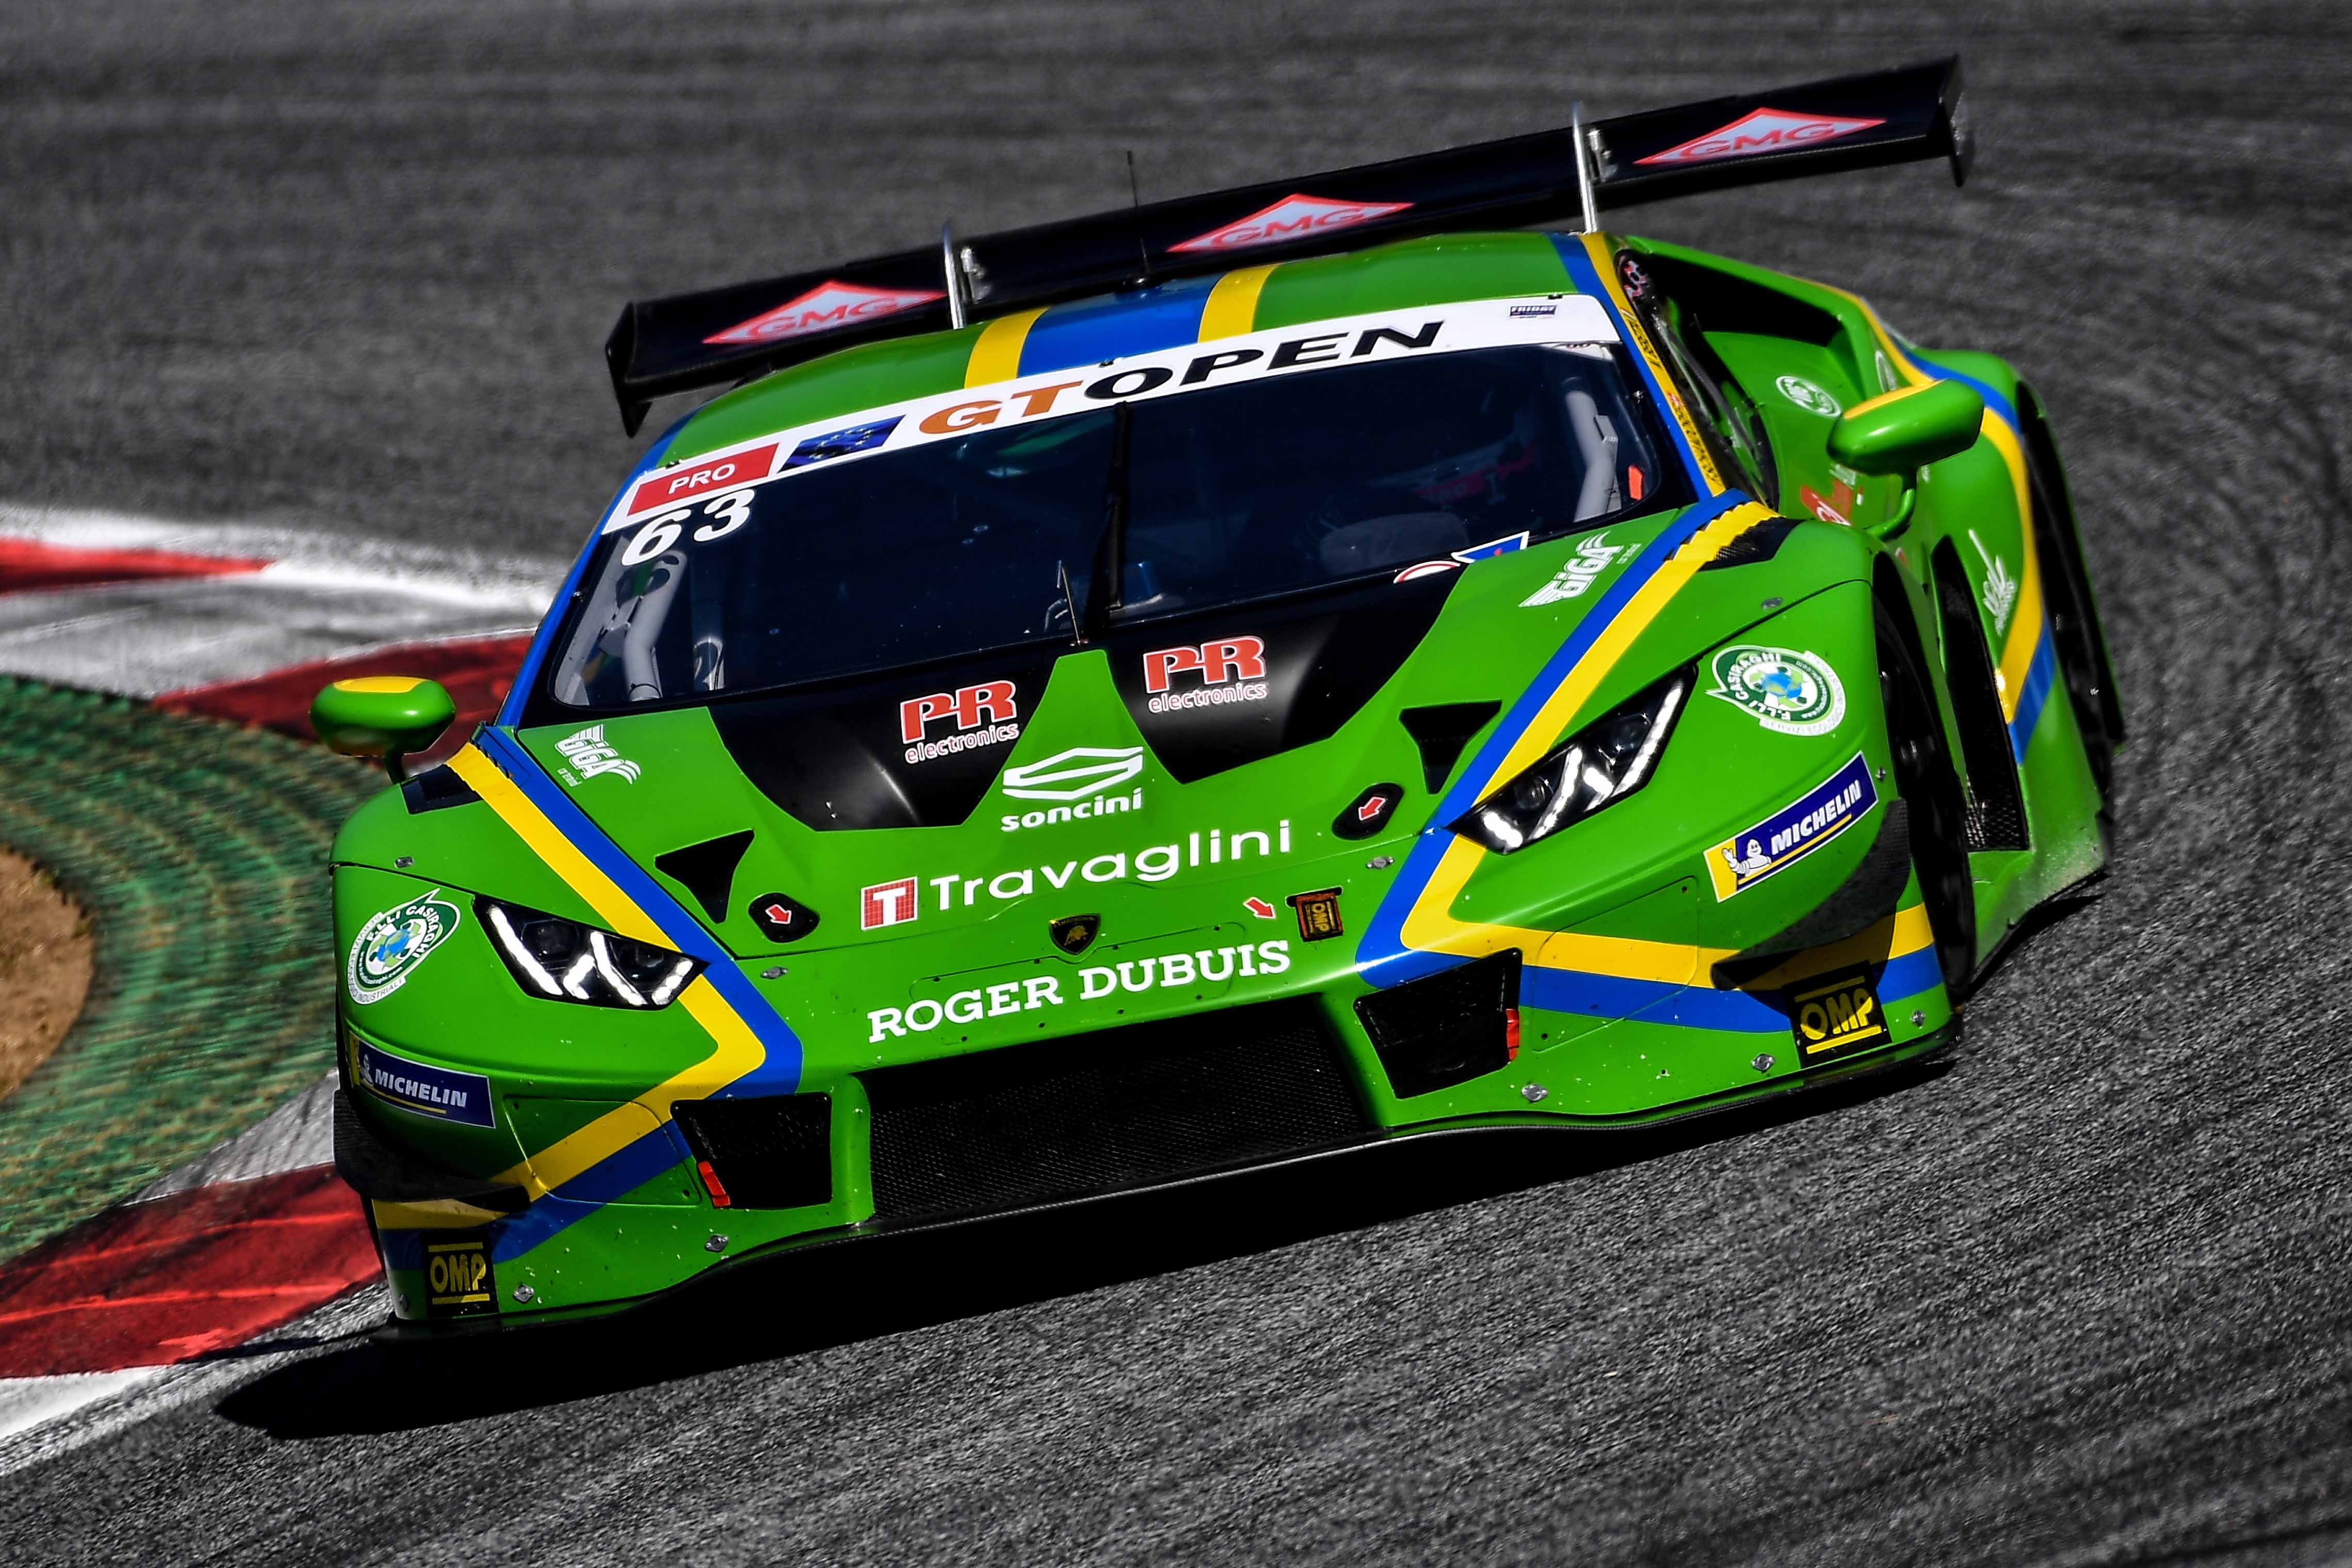 VICTORY AND SECOND PLACE AT THE RED BULL RING CONTINUES VSR'S RUN OF SUCCESS IN THE GT OPEN